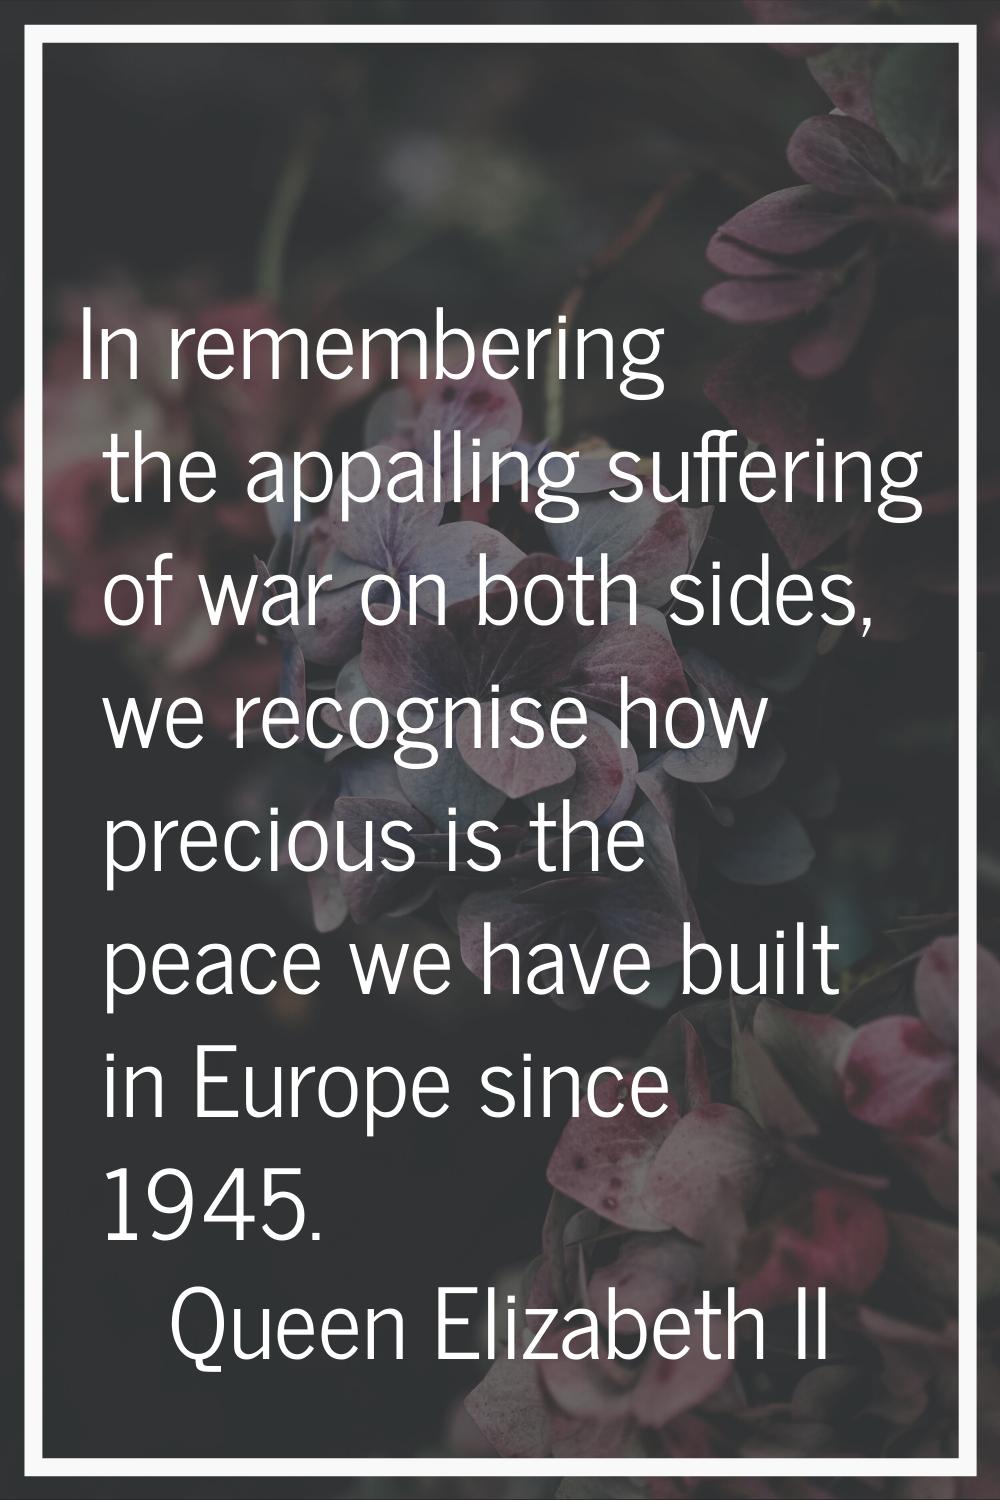 In remembering the appalling suffering of war on both sides, we recognise how precious is the peace